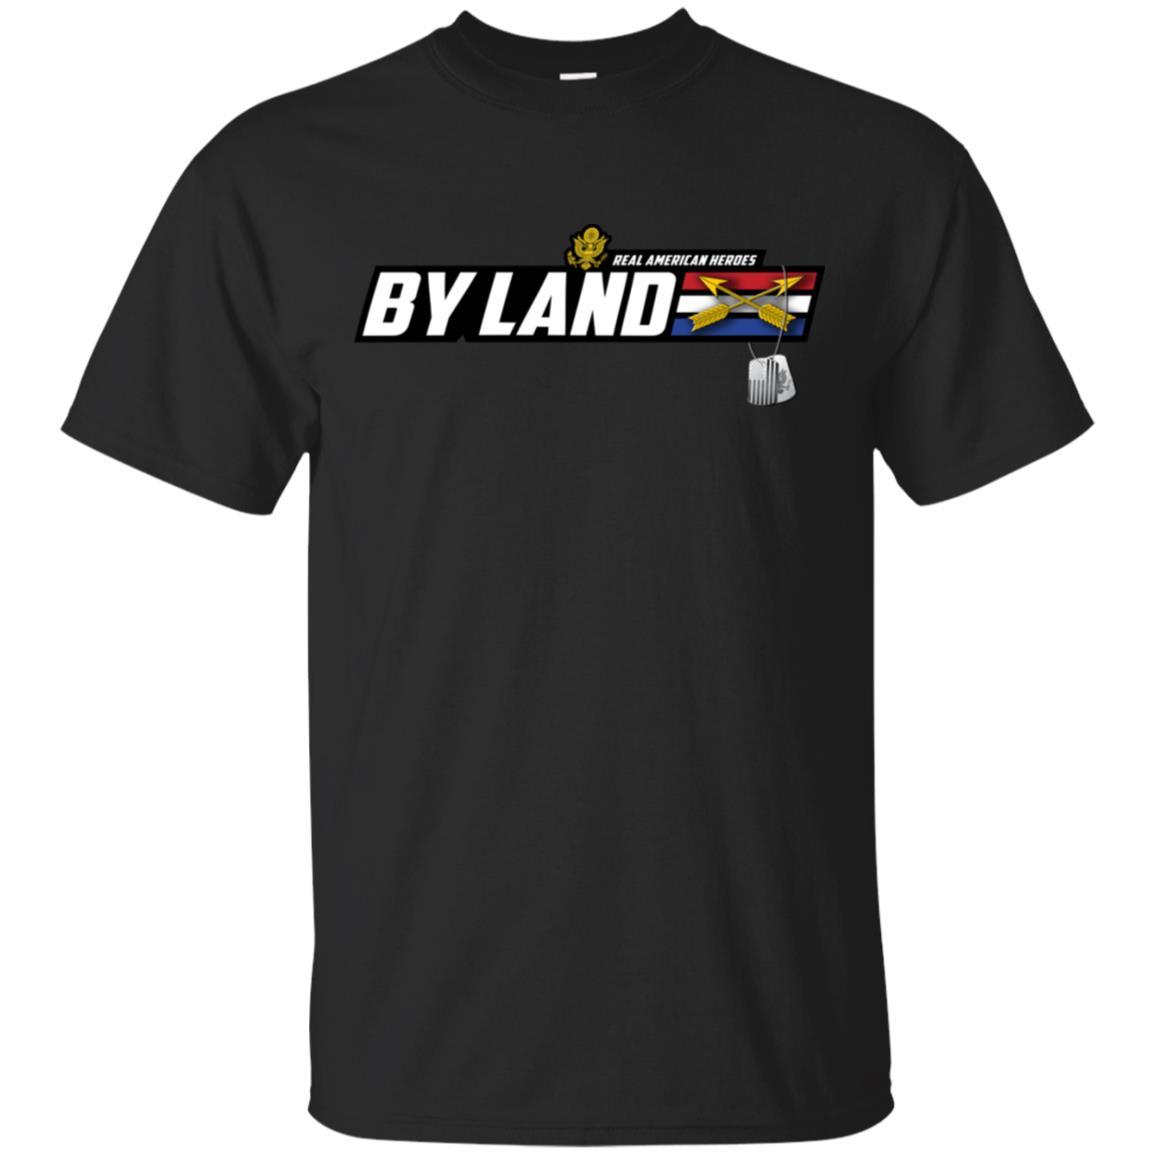 US Army T-Shirt "Special Forces (USASFC) Real American Heroes By Land" On Front-TShirt-Army-Veterans Nation